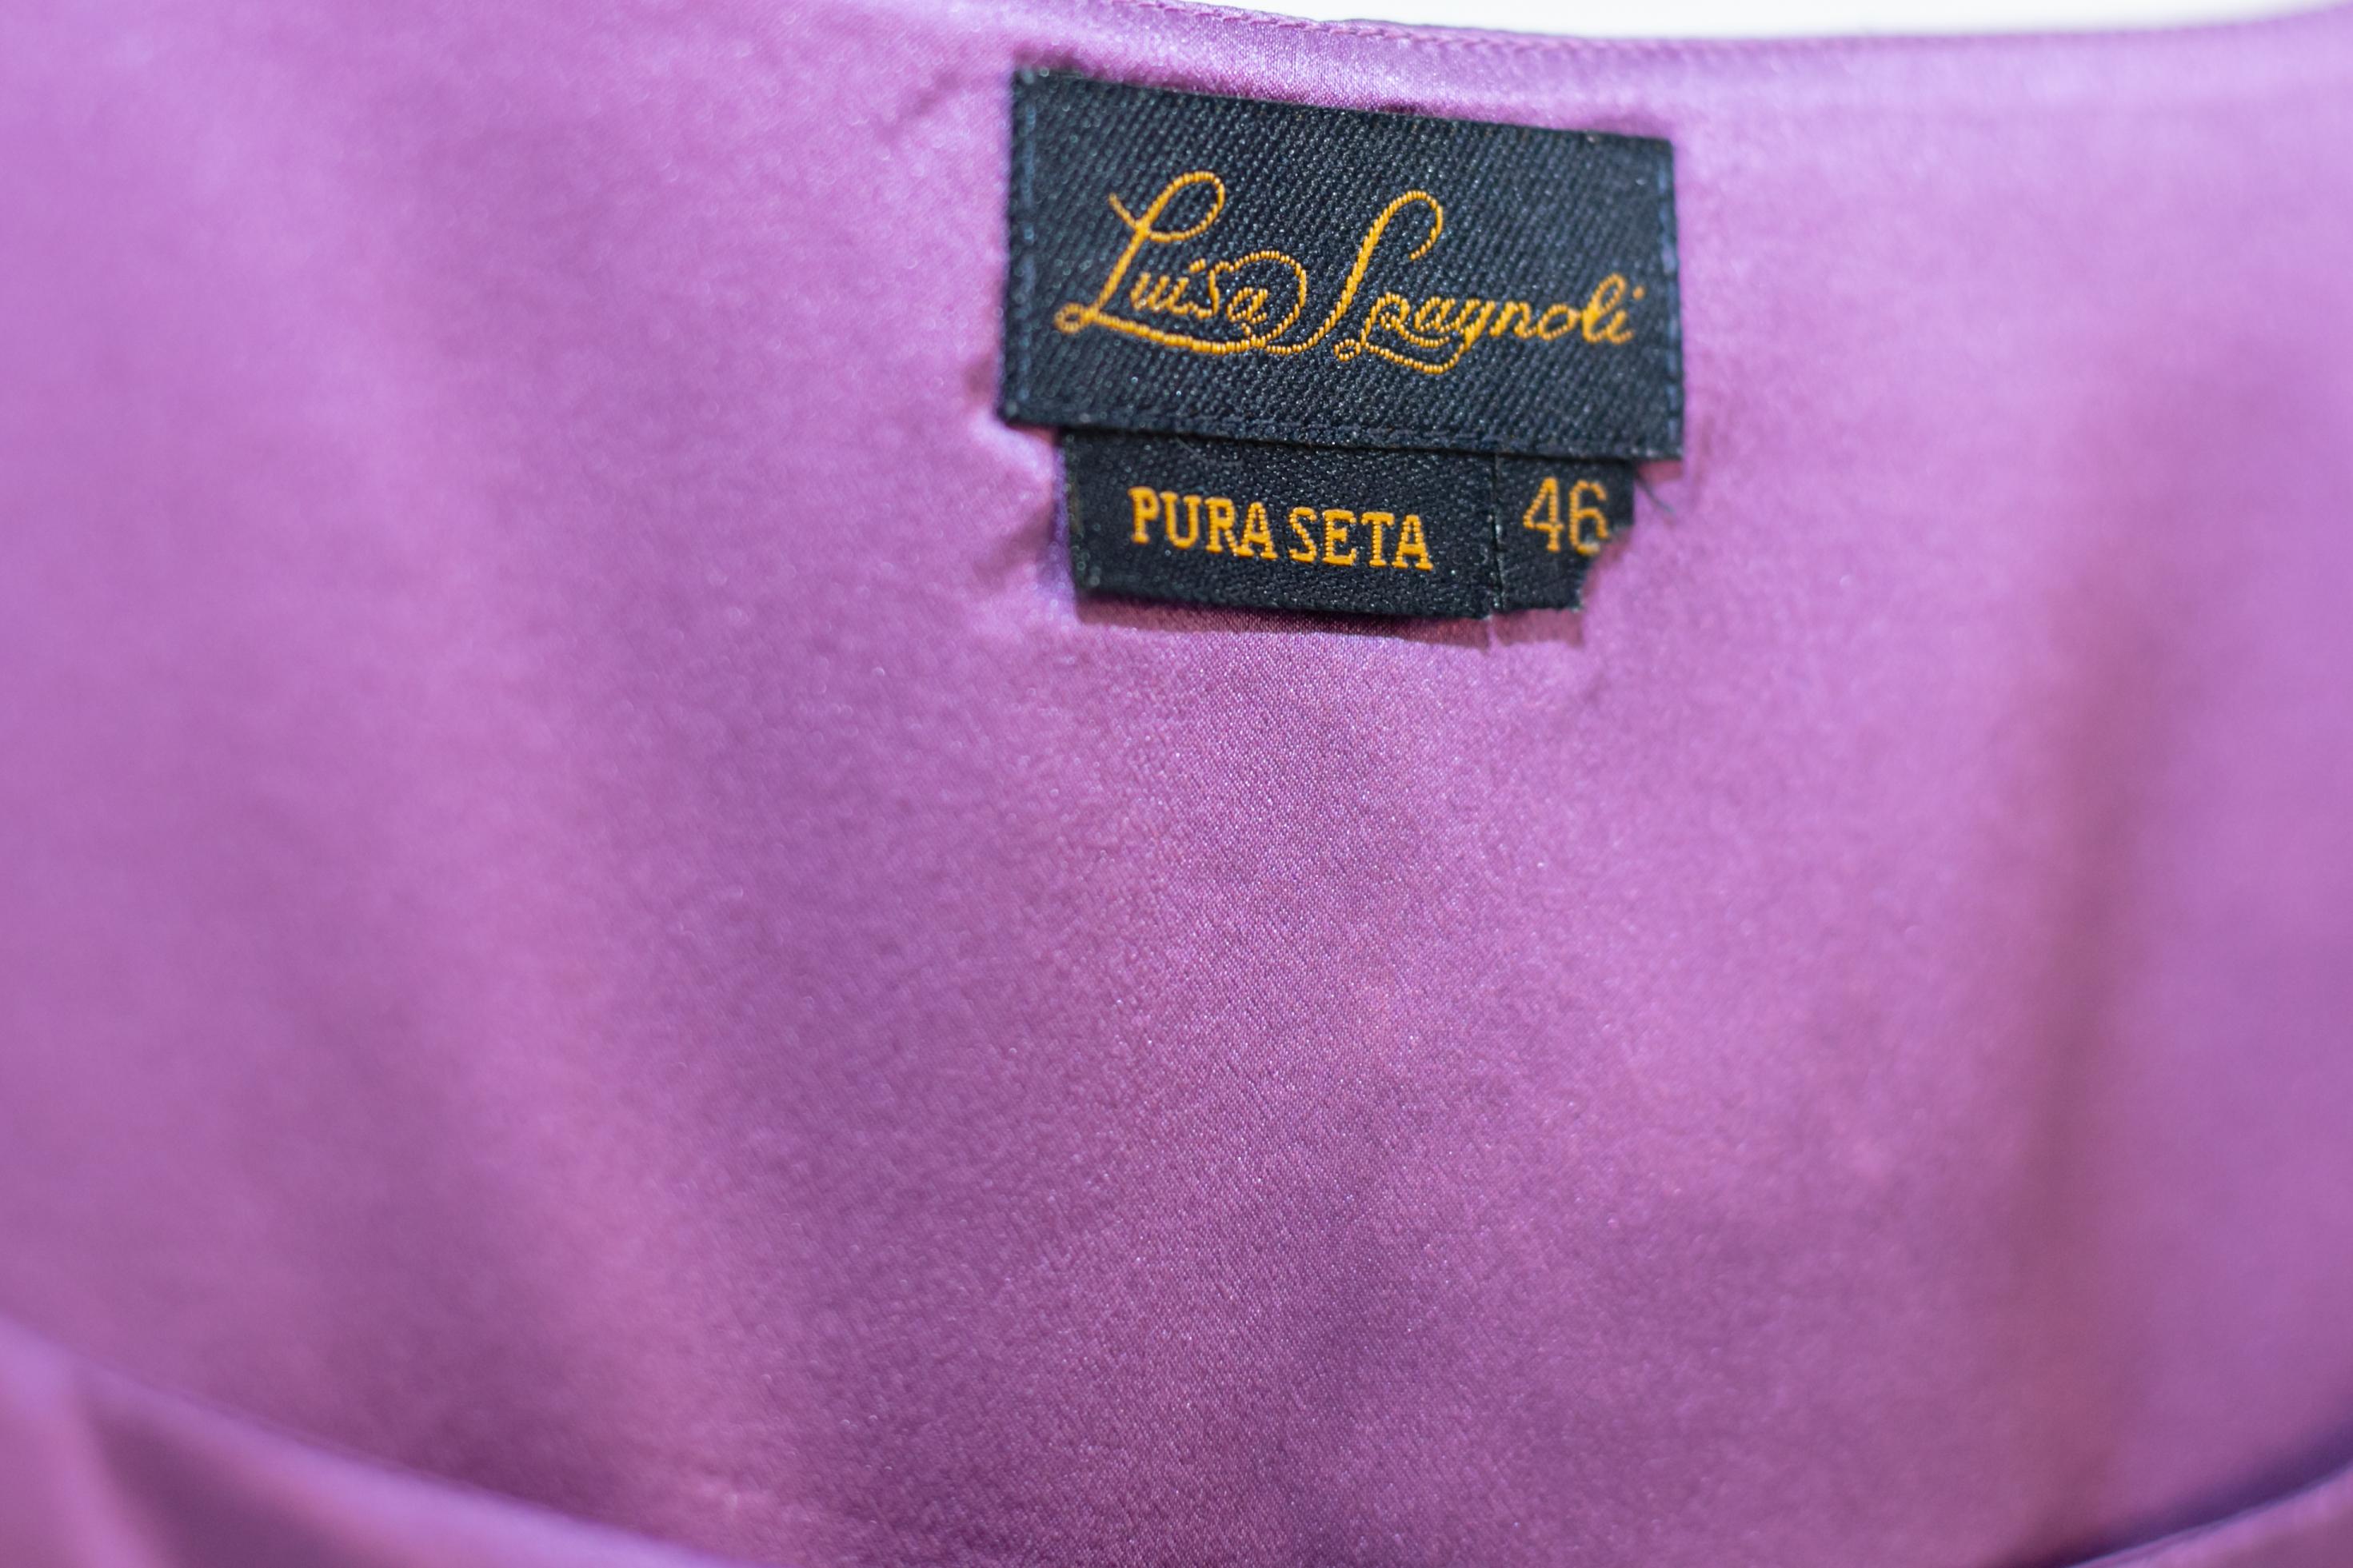 Colourful purple silk suit designed by Luisa Spagnoli in the 1980s, of fine Italian manufacture. ORIGINAL LABEL.
The dress consists of a classic, square neckline blouse with straps and a knee-length purple silk skirt with sweet flounces. Beautiful